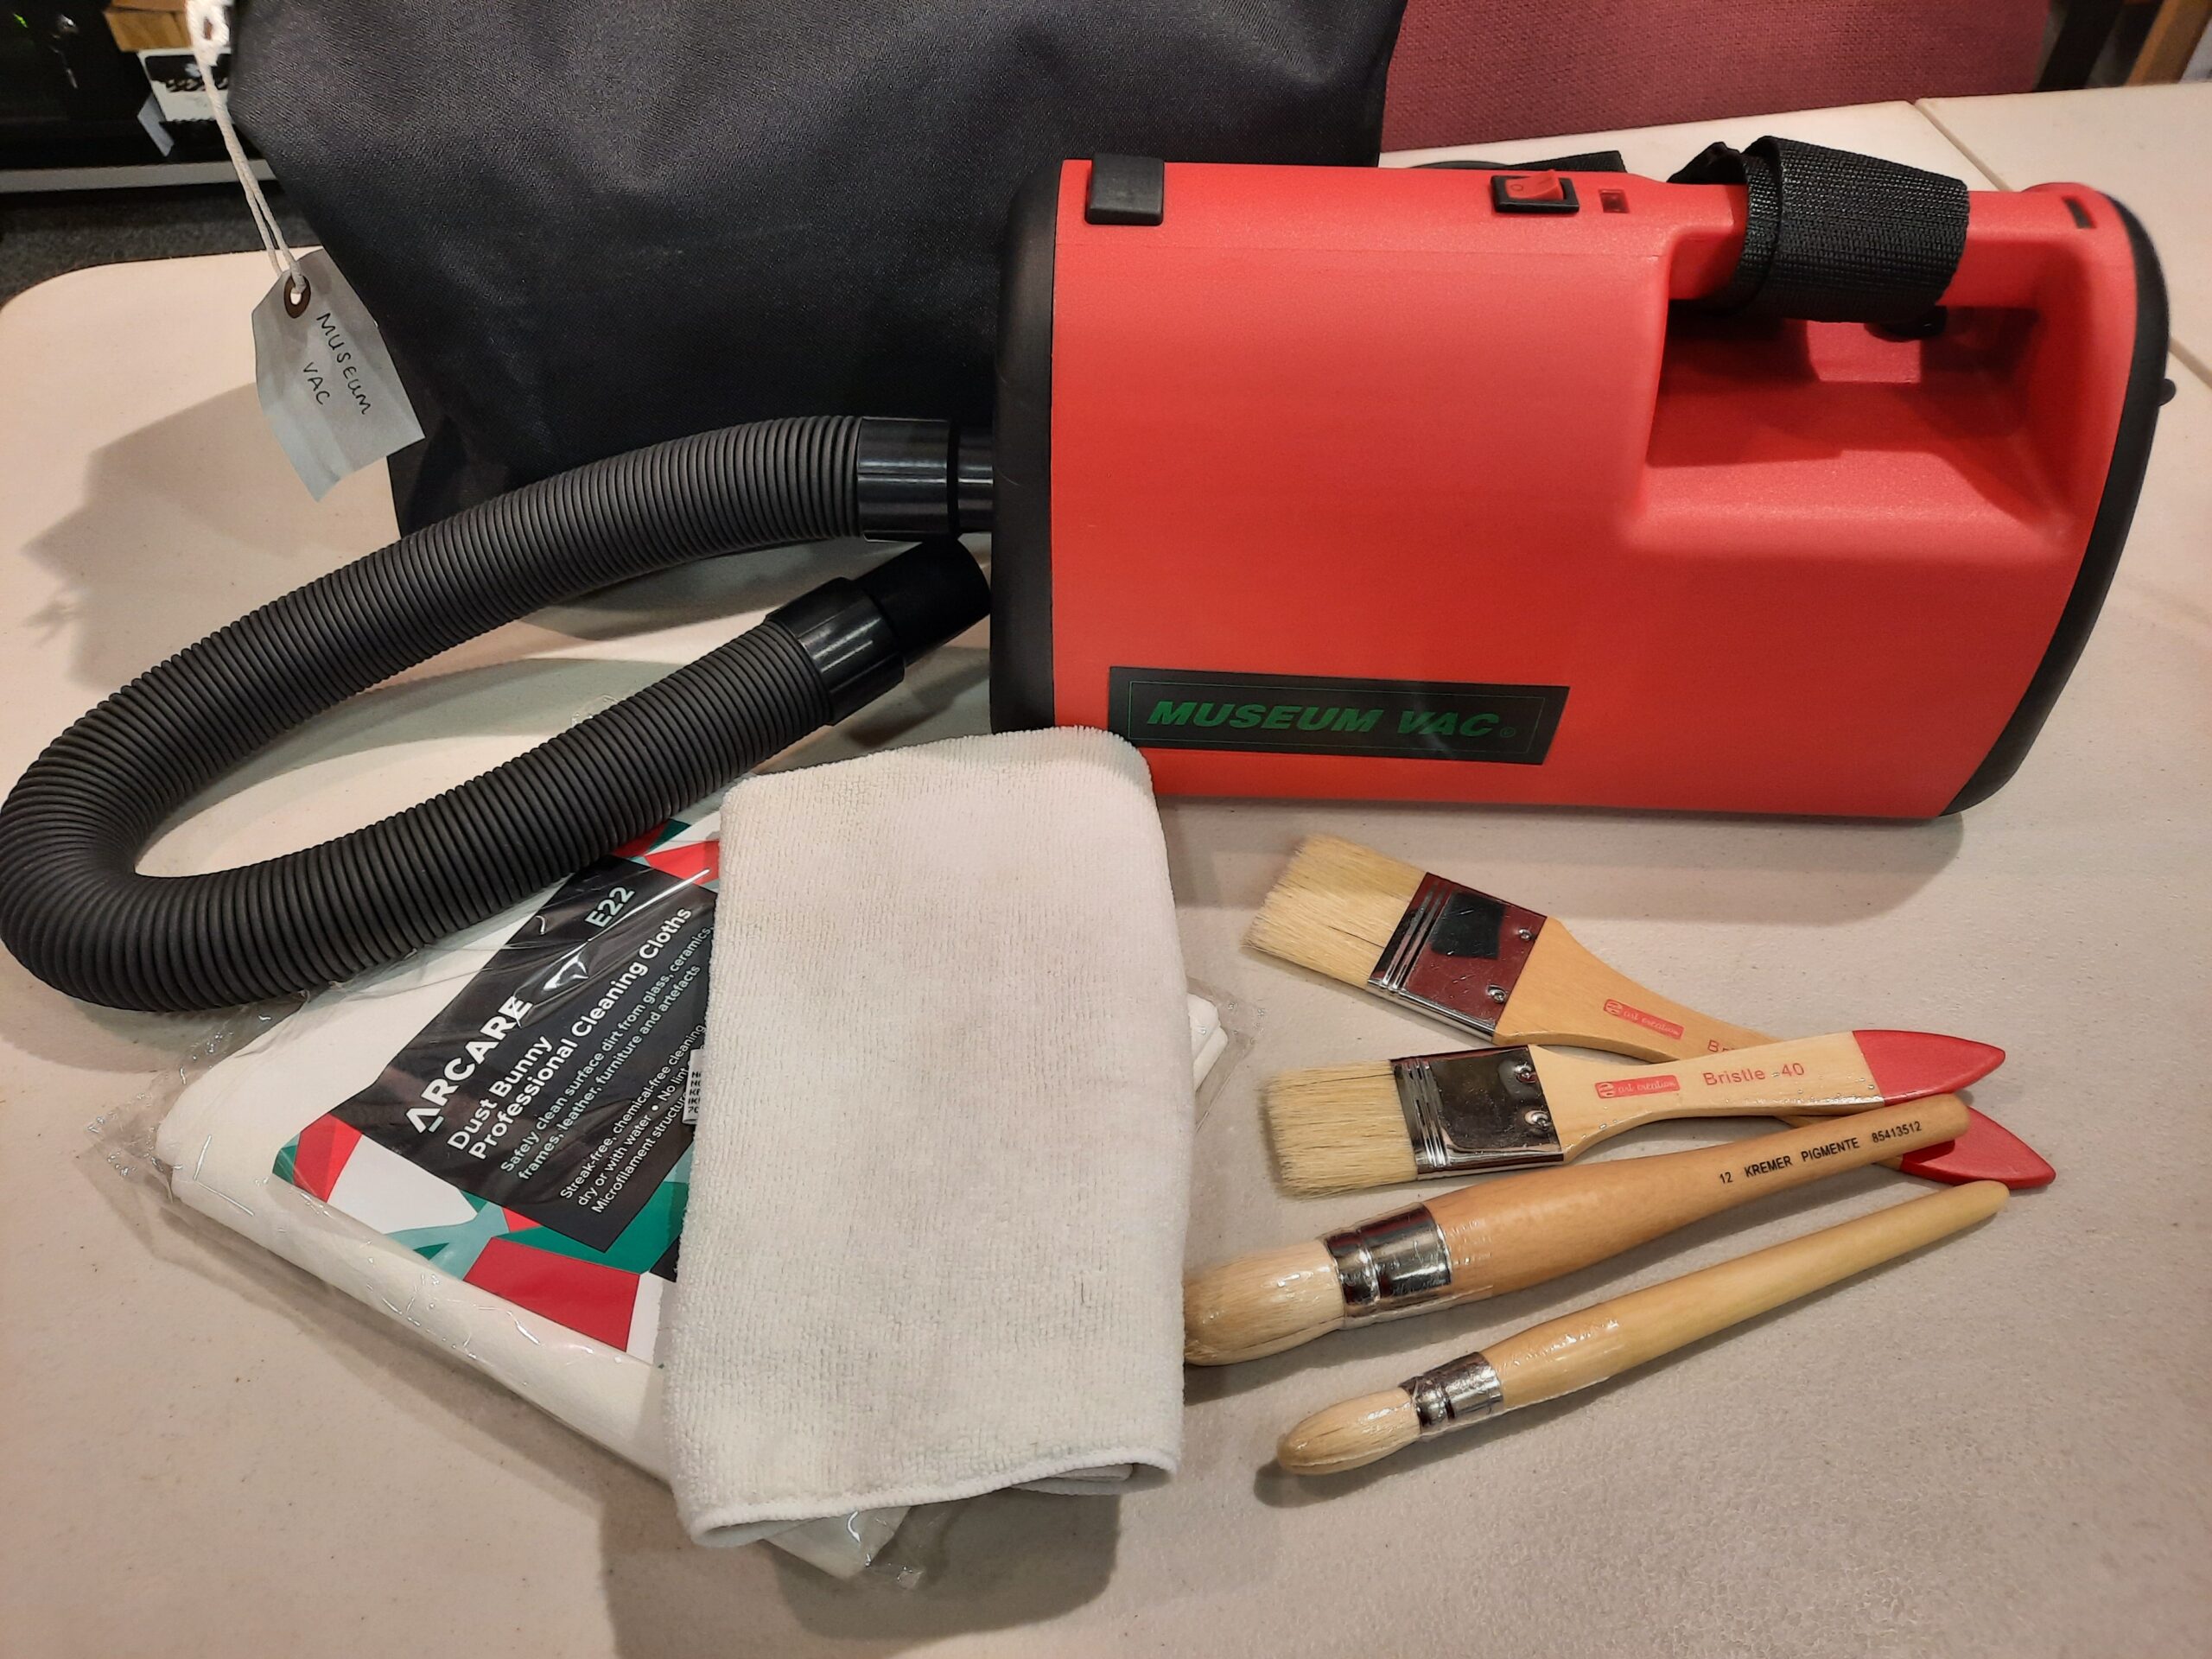 The image shows museum cleaning equipment including a red museum vacuum cleaner, assorted cleaning brushes, a white microfibre cloth and some Dust Bunny Professional cleaning cloths used for different types of museum items